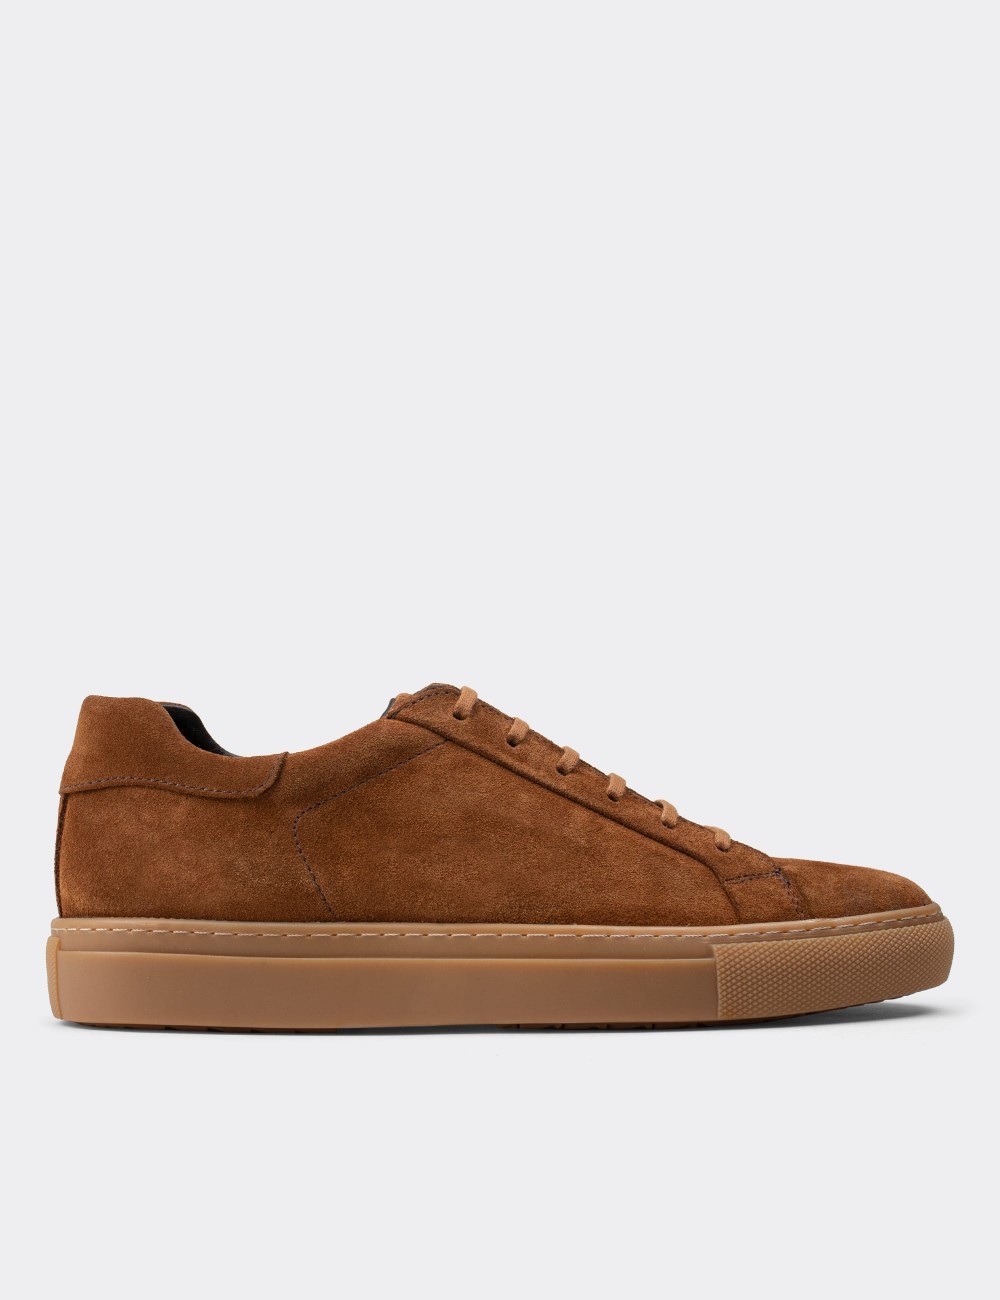 Brown Suede Leather Sneakers - 01829MTRNC01